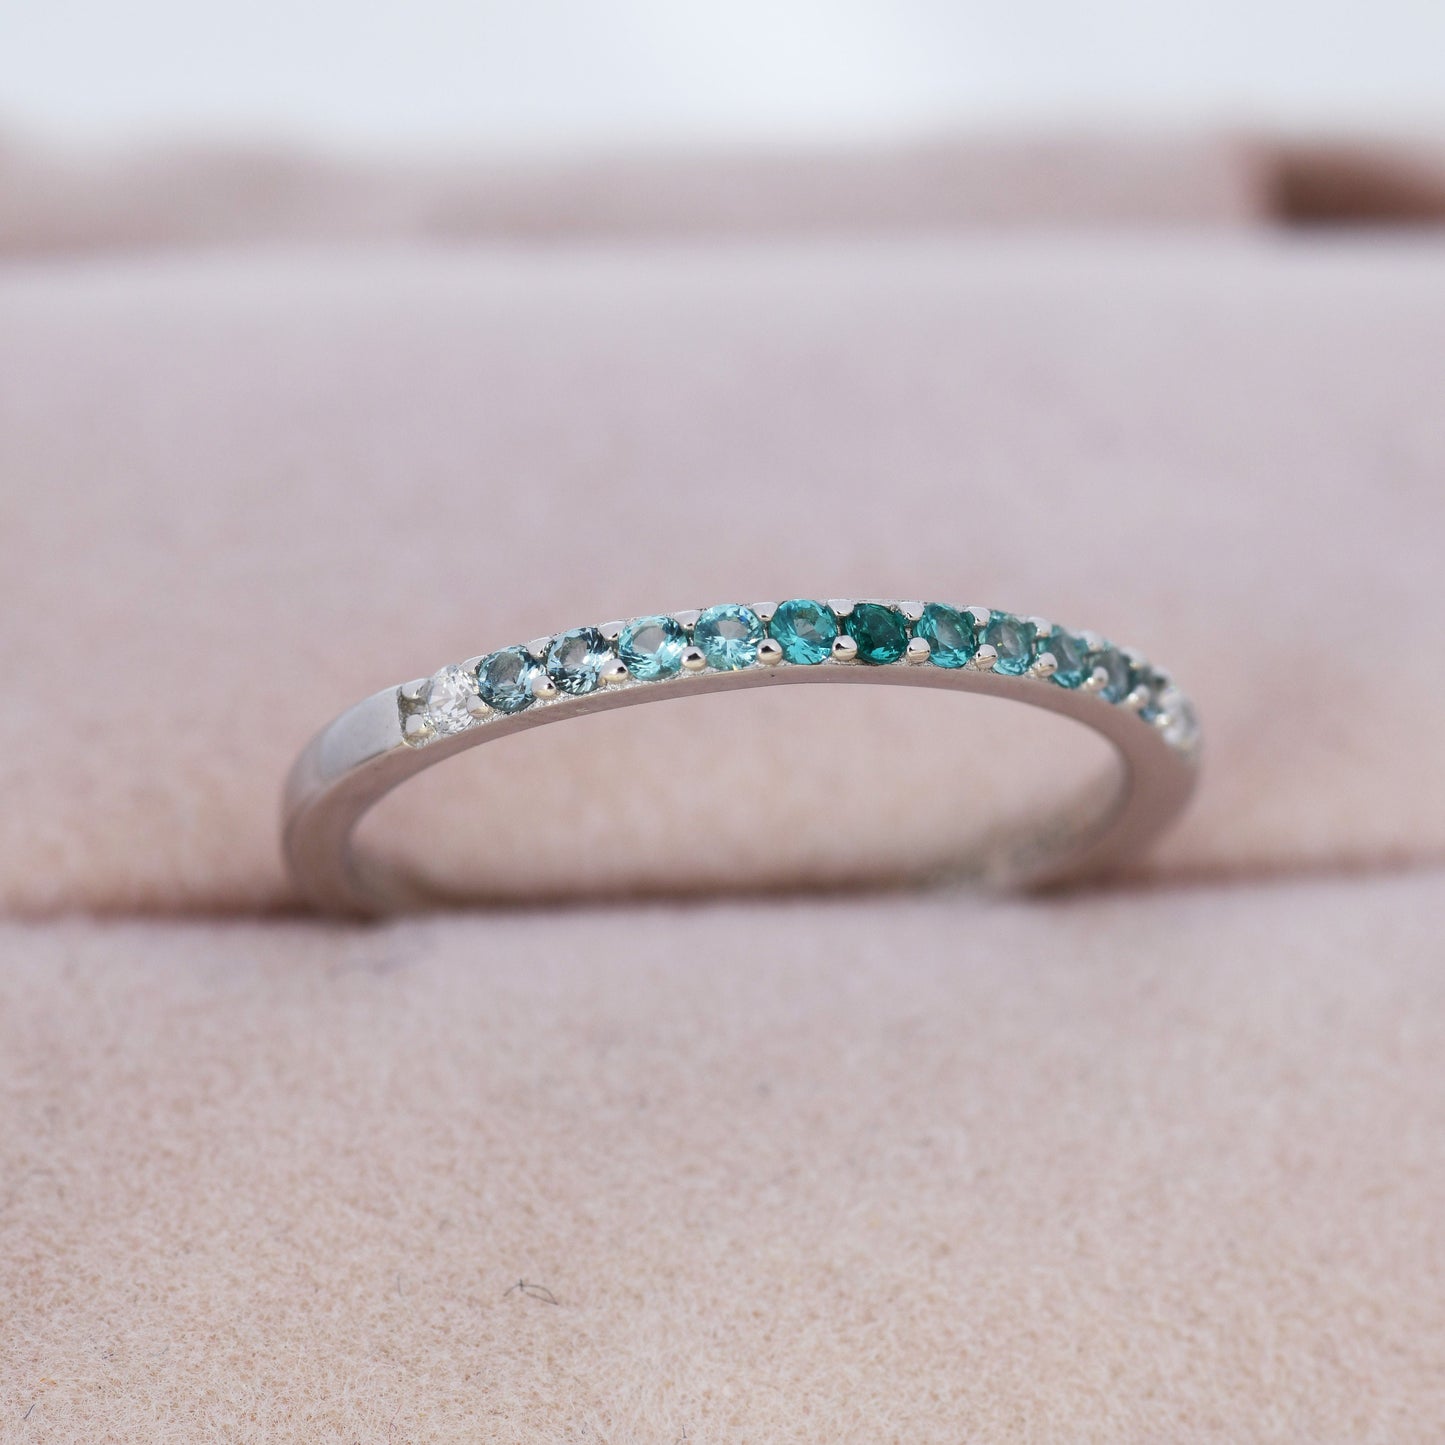 Emerald Green Ombre Half Eternity Ring in Sterling Silver, Silver or Gold, Green CZ Skinny Ring, Minimalist Stacking Ring US 5 - 8